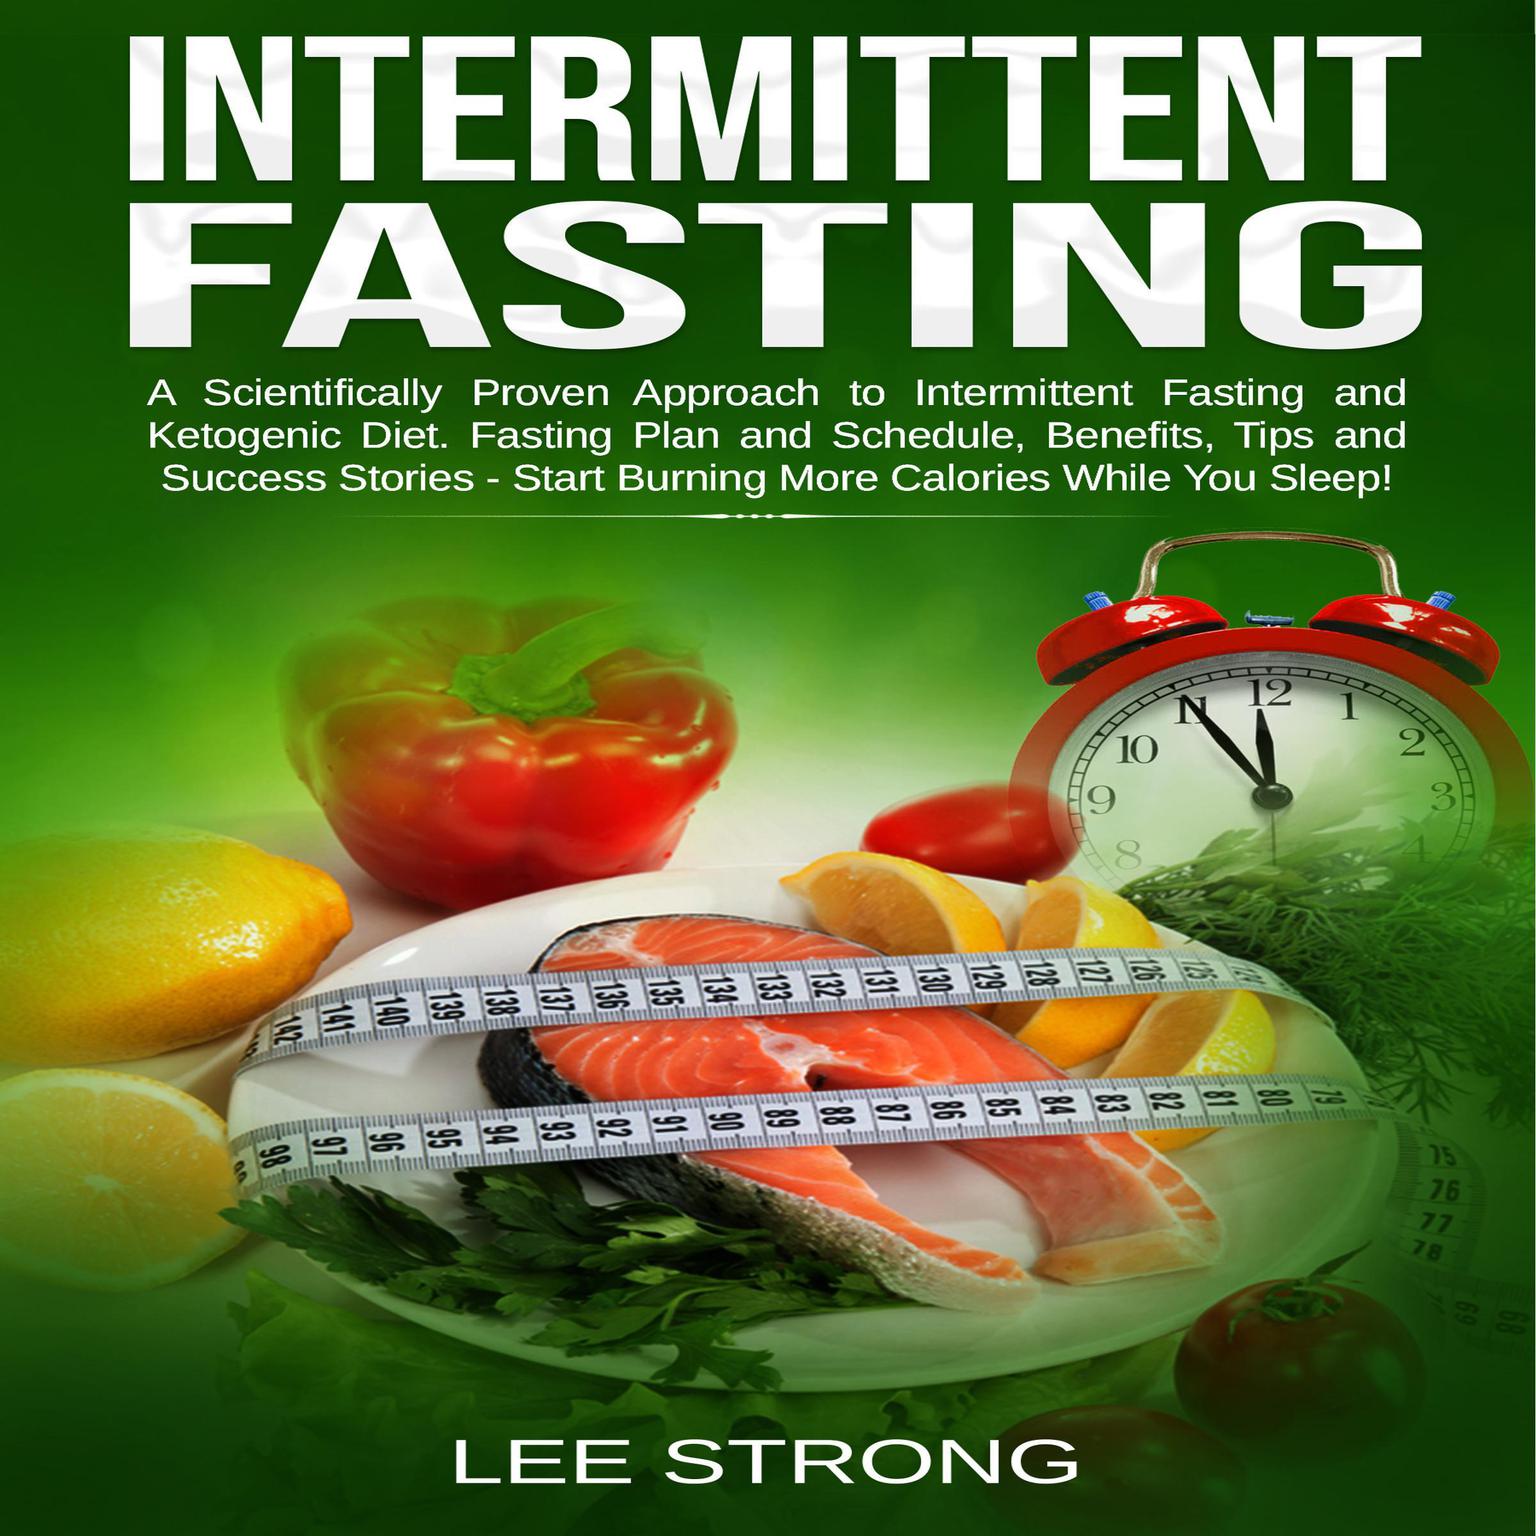 Intermittent Fasting: A Scientifically Proven Approach to Intermittent Fasting and Ketogenic Diet. Fasting Plan and Schedule, Benefits, Tips and Success Stories - Start Burning More Calories While You Sleep! Audiobook, by Lee Strong